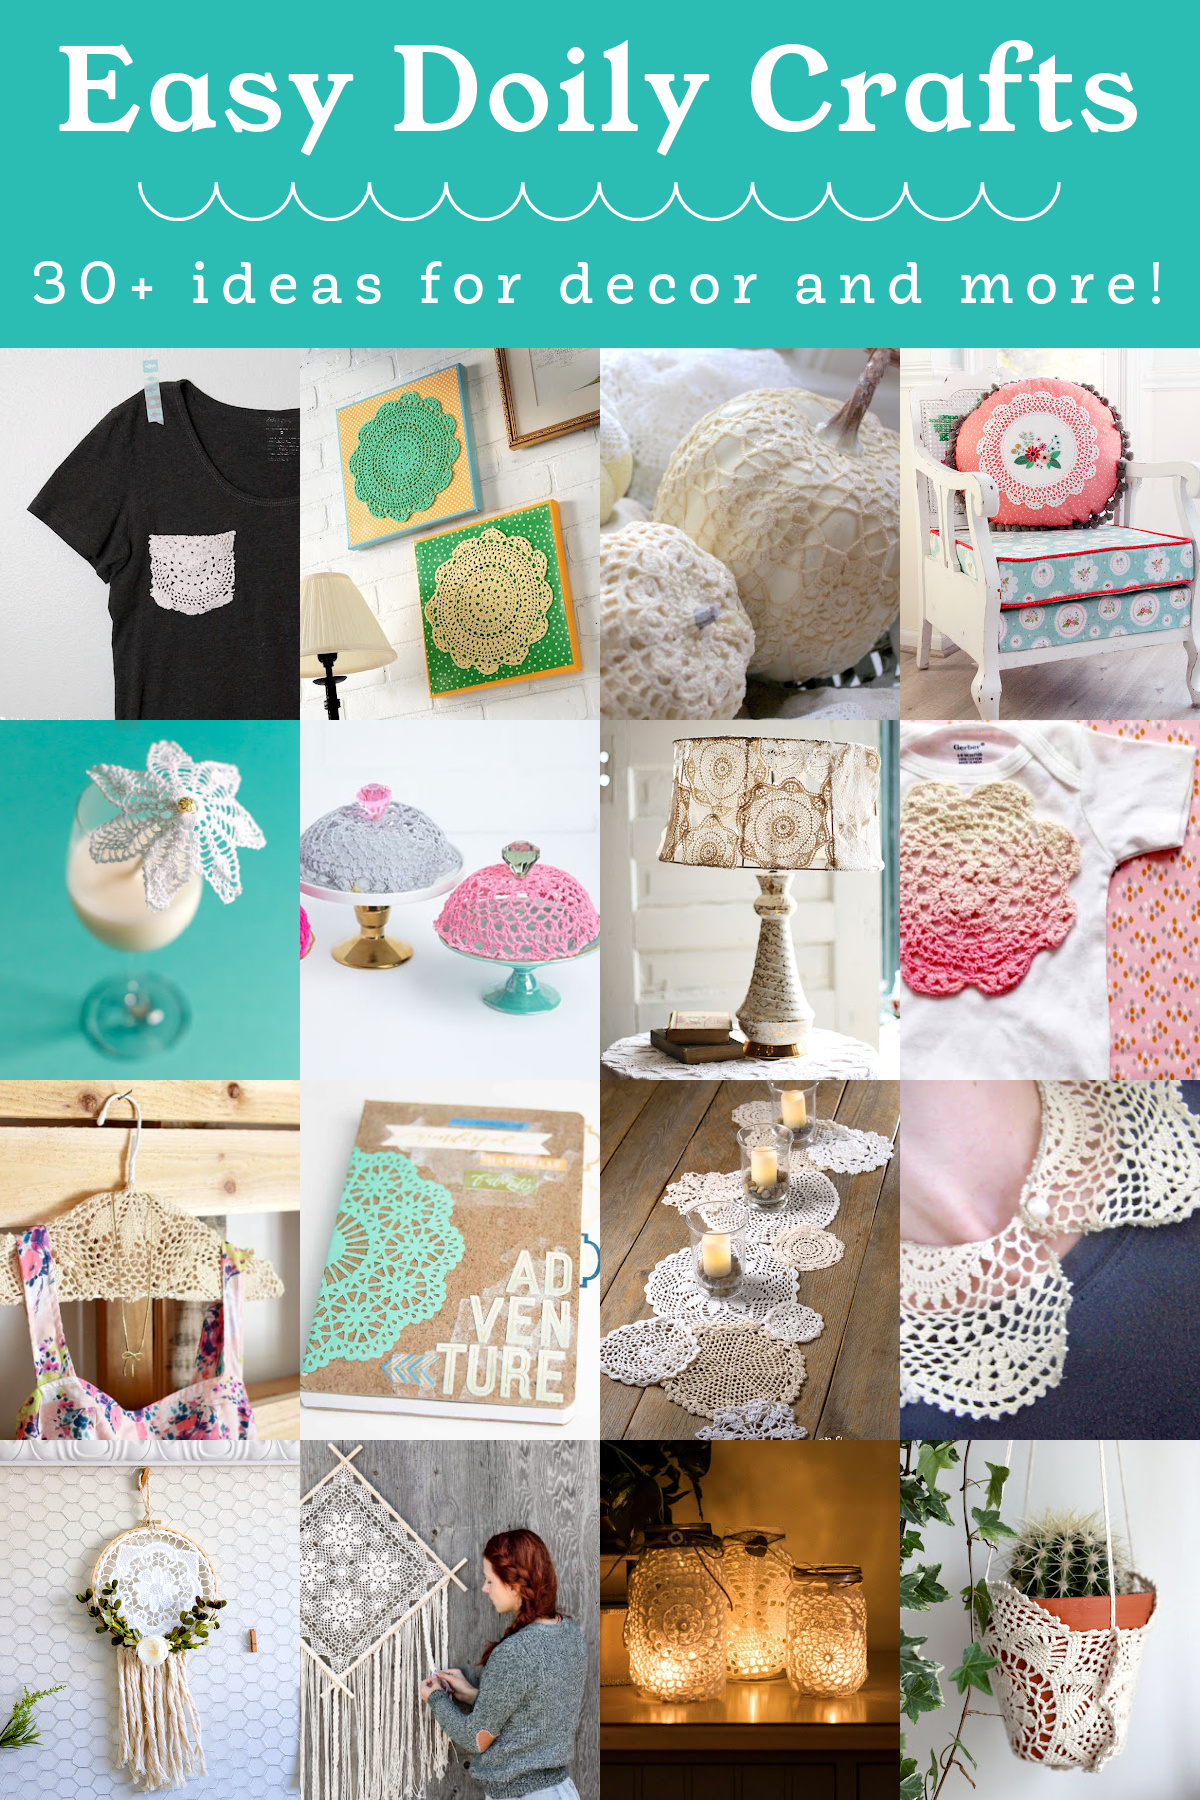 Doily Crafts you'll love